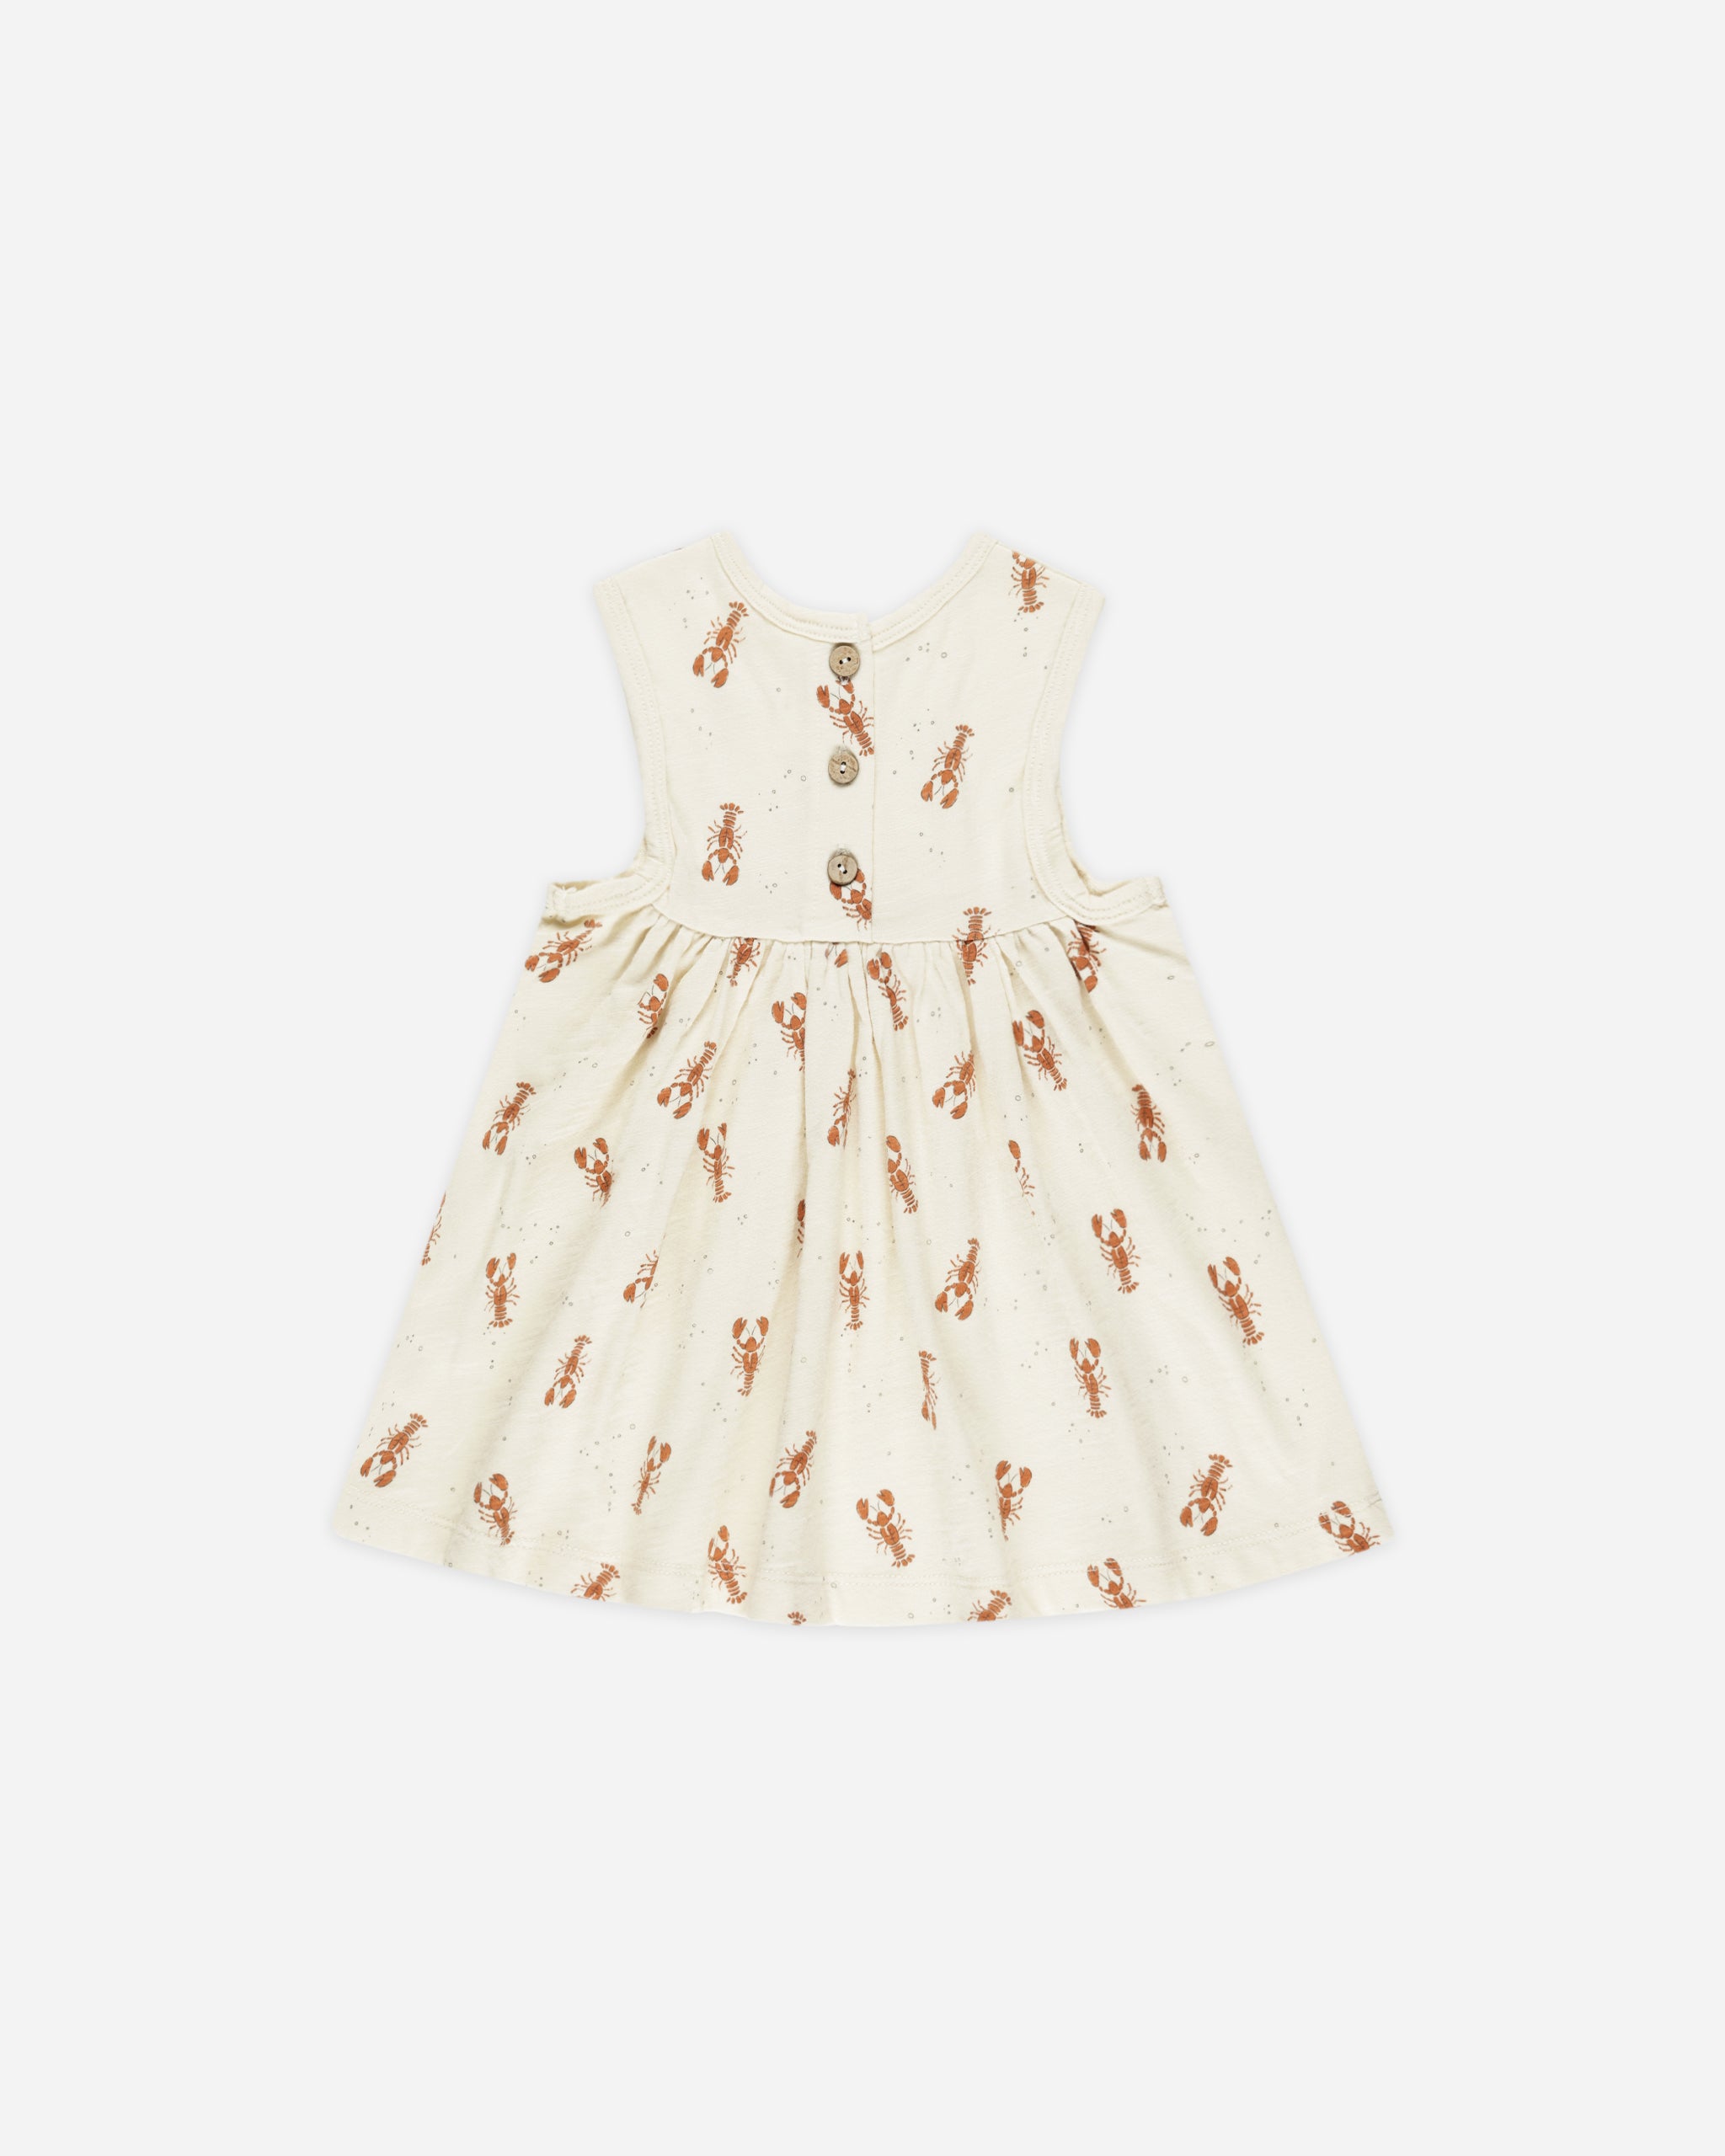 Layla Dress || Lobsters - Rylee + Cru | Kids Clothes | Trendy Baby Clothes | Modern Infant Outfits |